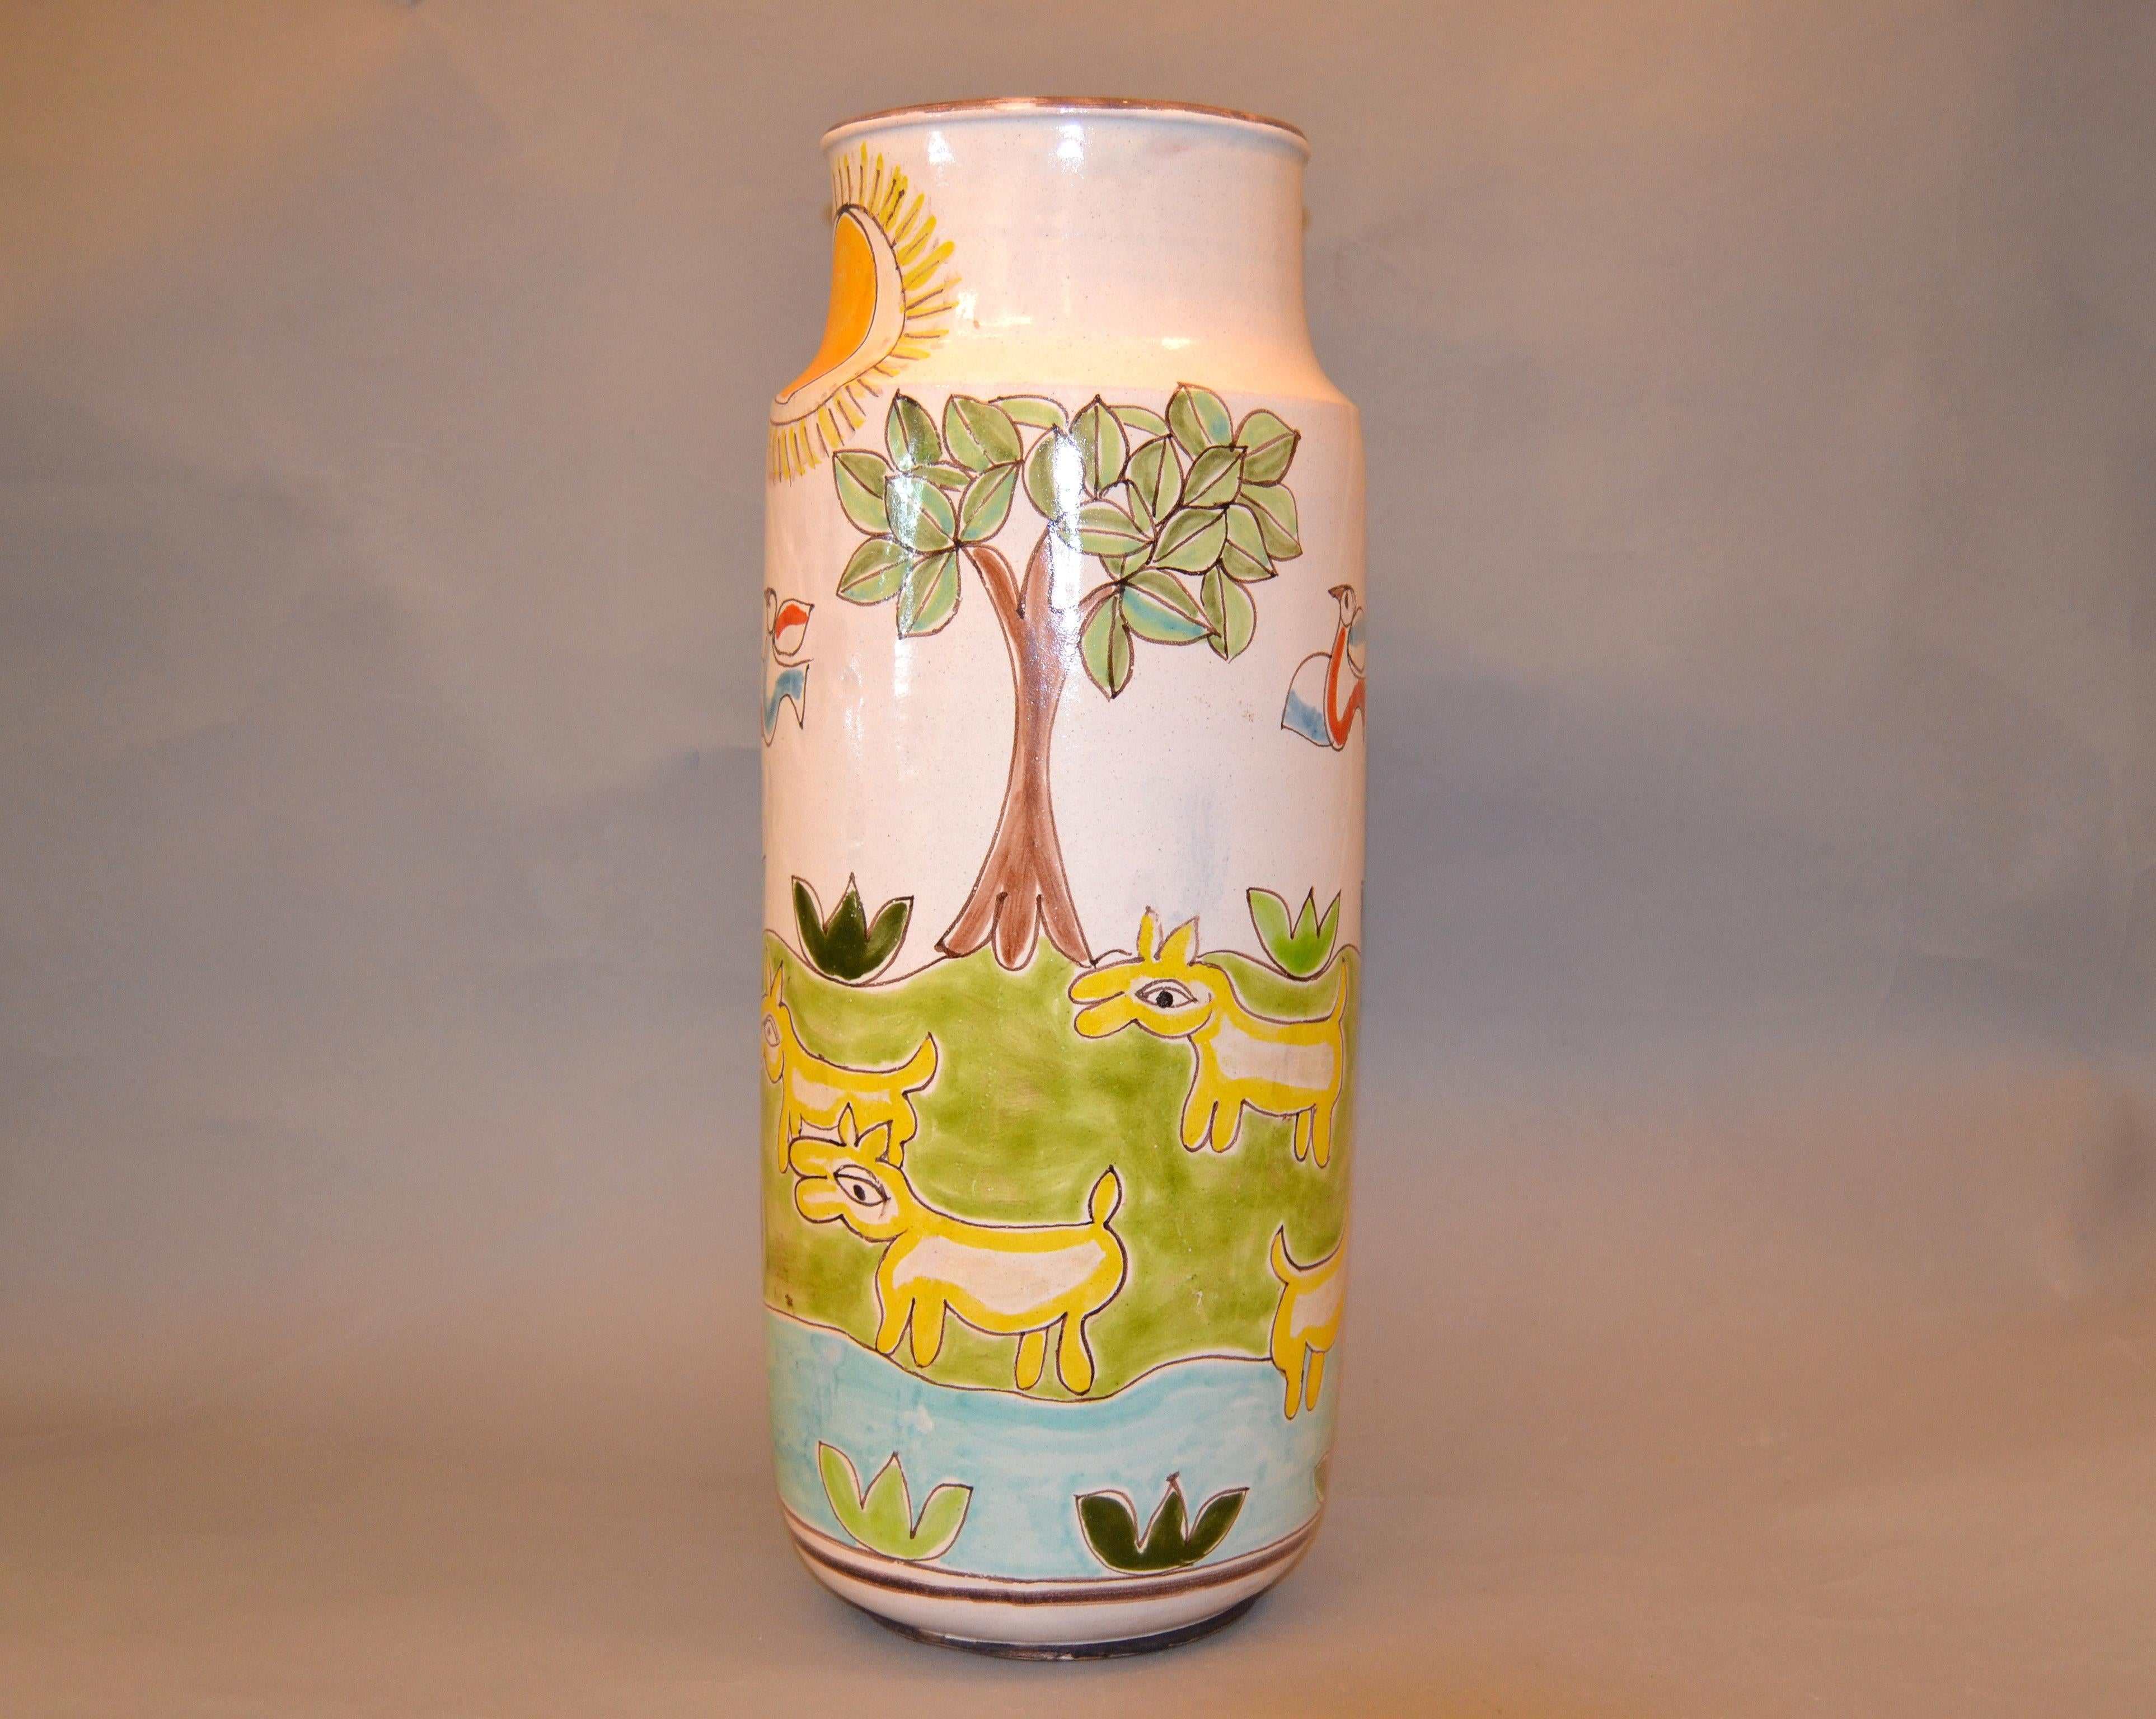 Original Italian Giovanni Desimone hand painted tall art pottery flower vase, vessel.
The glazed vase painting depicts a man playing the flute.
Marked and numbered on underside, 'DeSimone, Italy 3'.
THIS ITEM WILL BE PACKED AND BOXED VIA UPS TO